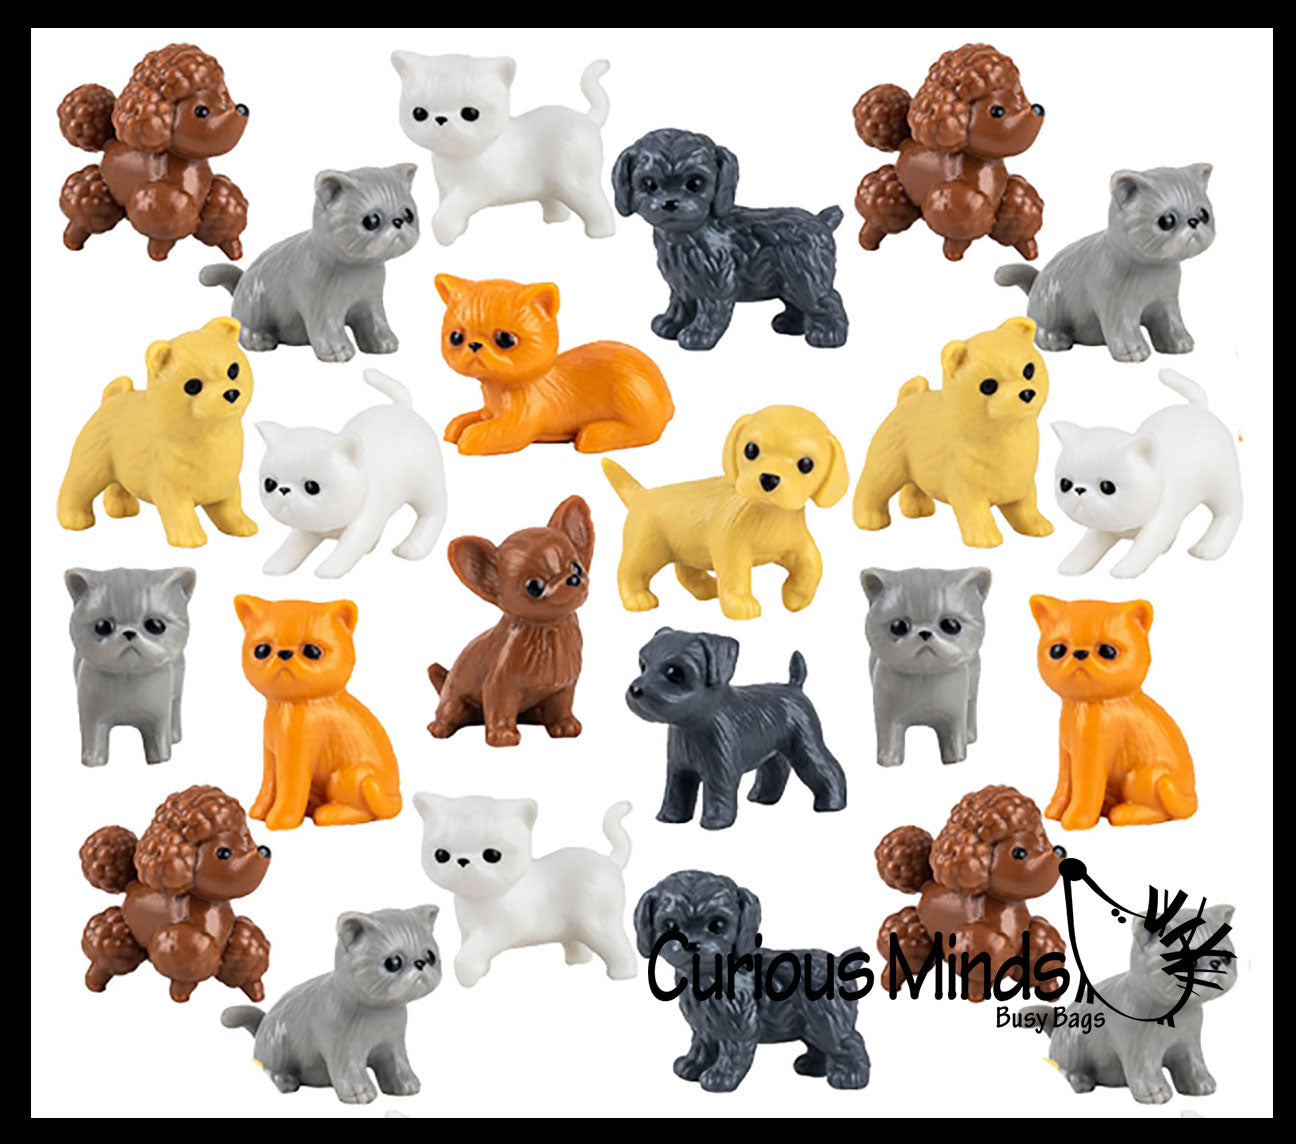 Cute Tiny Cat & Dog Figurines - Mini Toys - Small Novelty Prize Toy - Party Favors - Gift 24 Mini Cat and Dog Figurines - (2 Dozen)